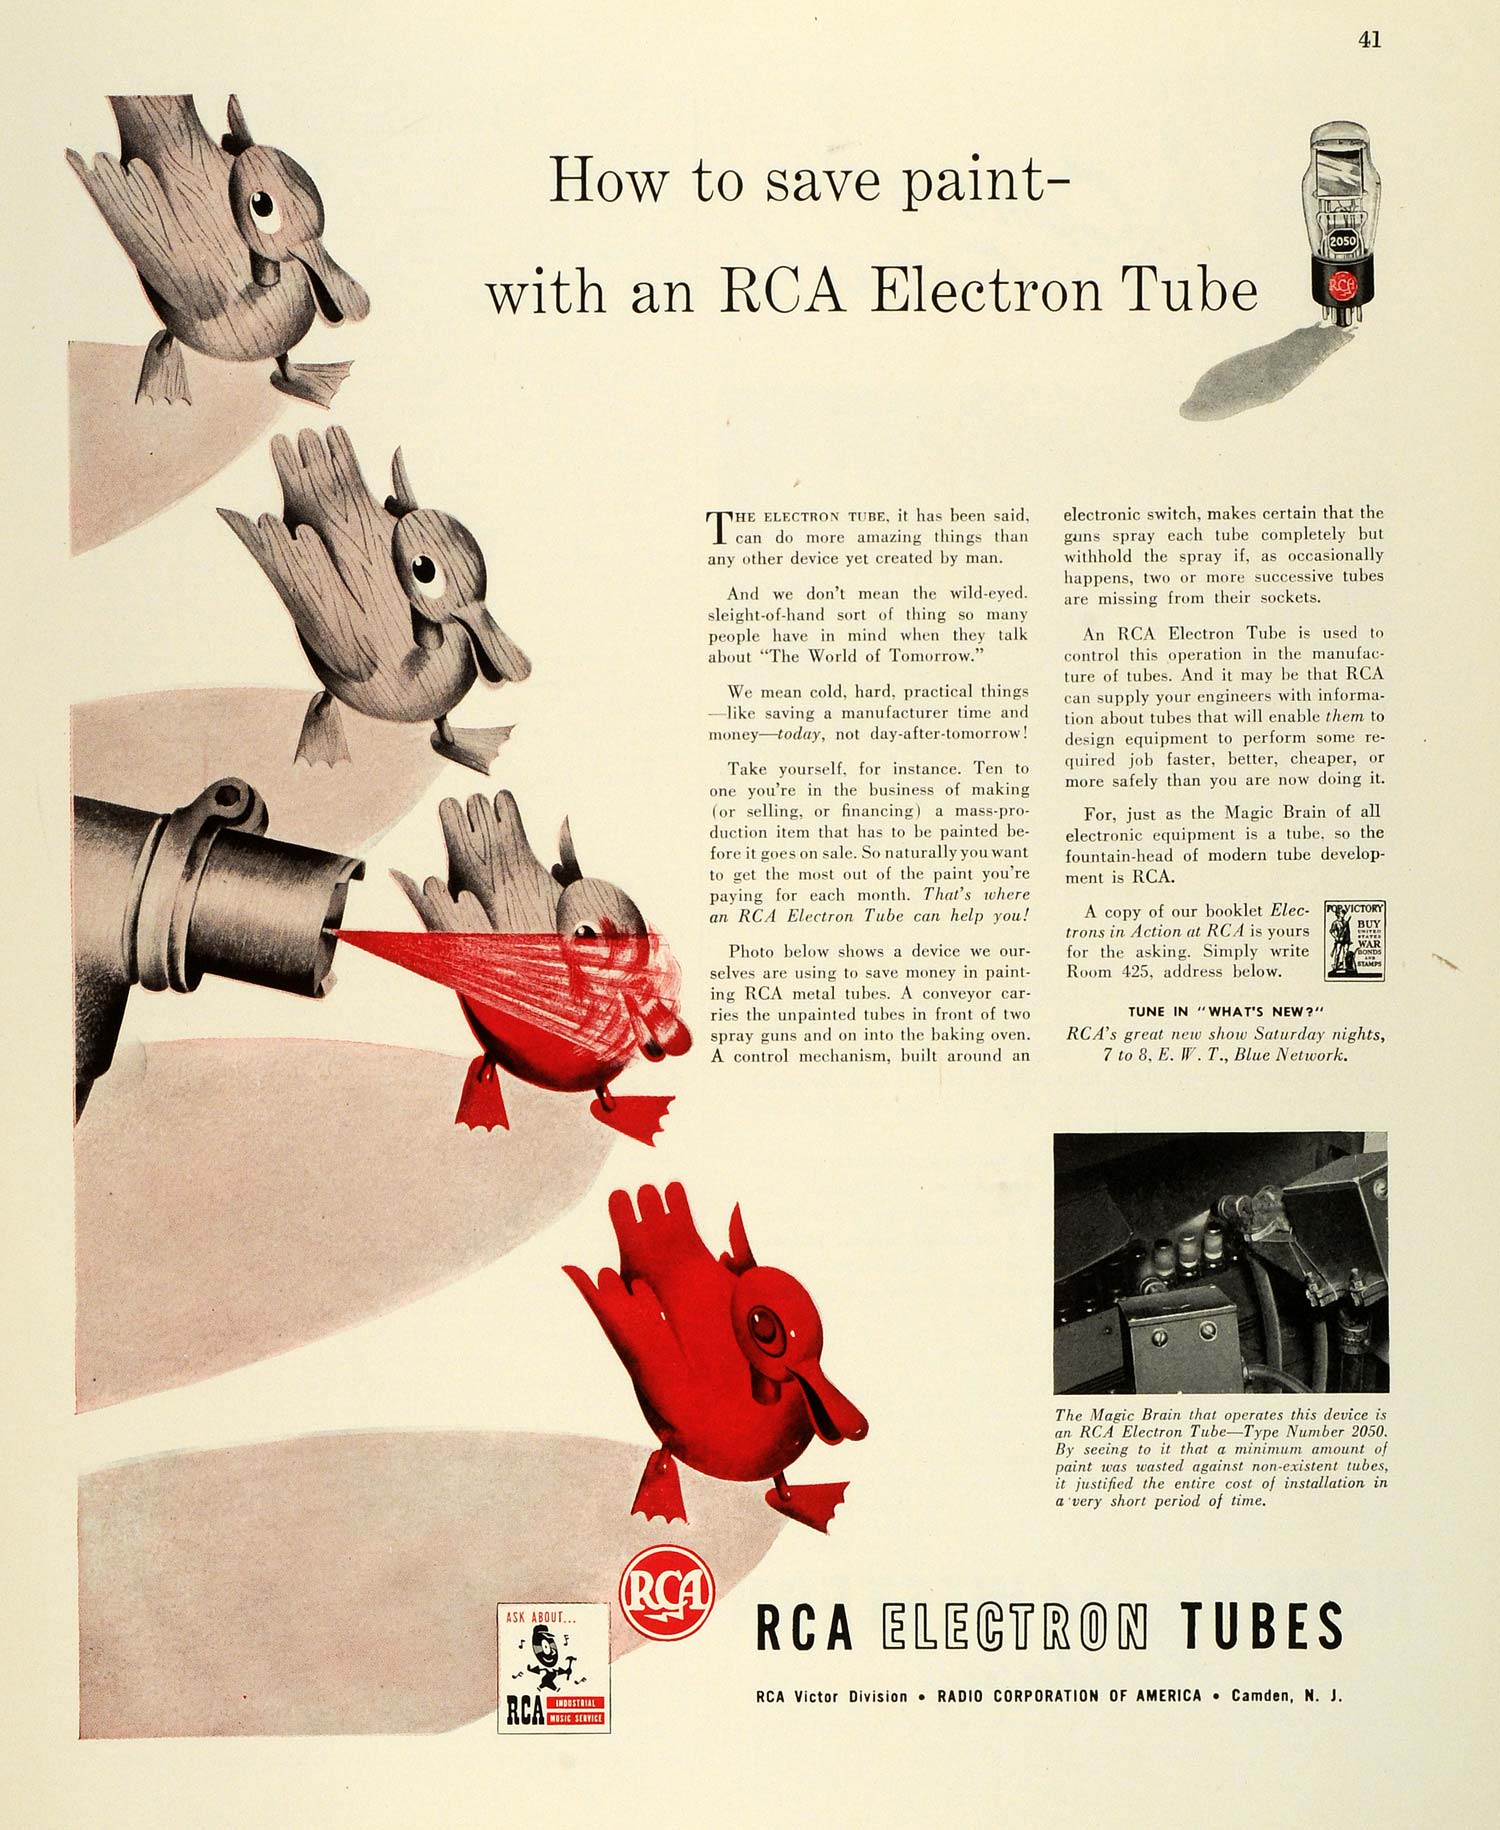 1943 Ad RCA Electron Tube WWII Mass Production Painting War Material FZ5